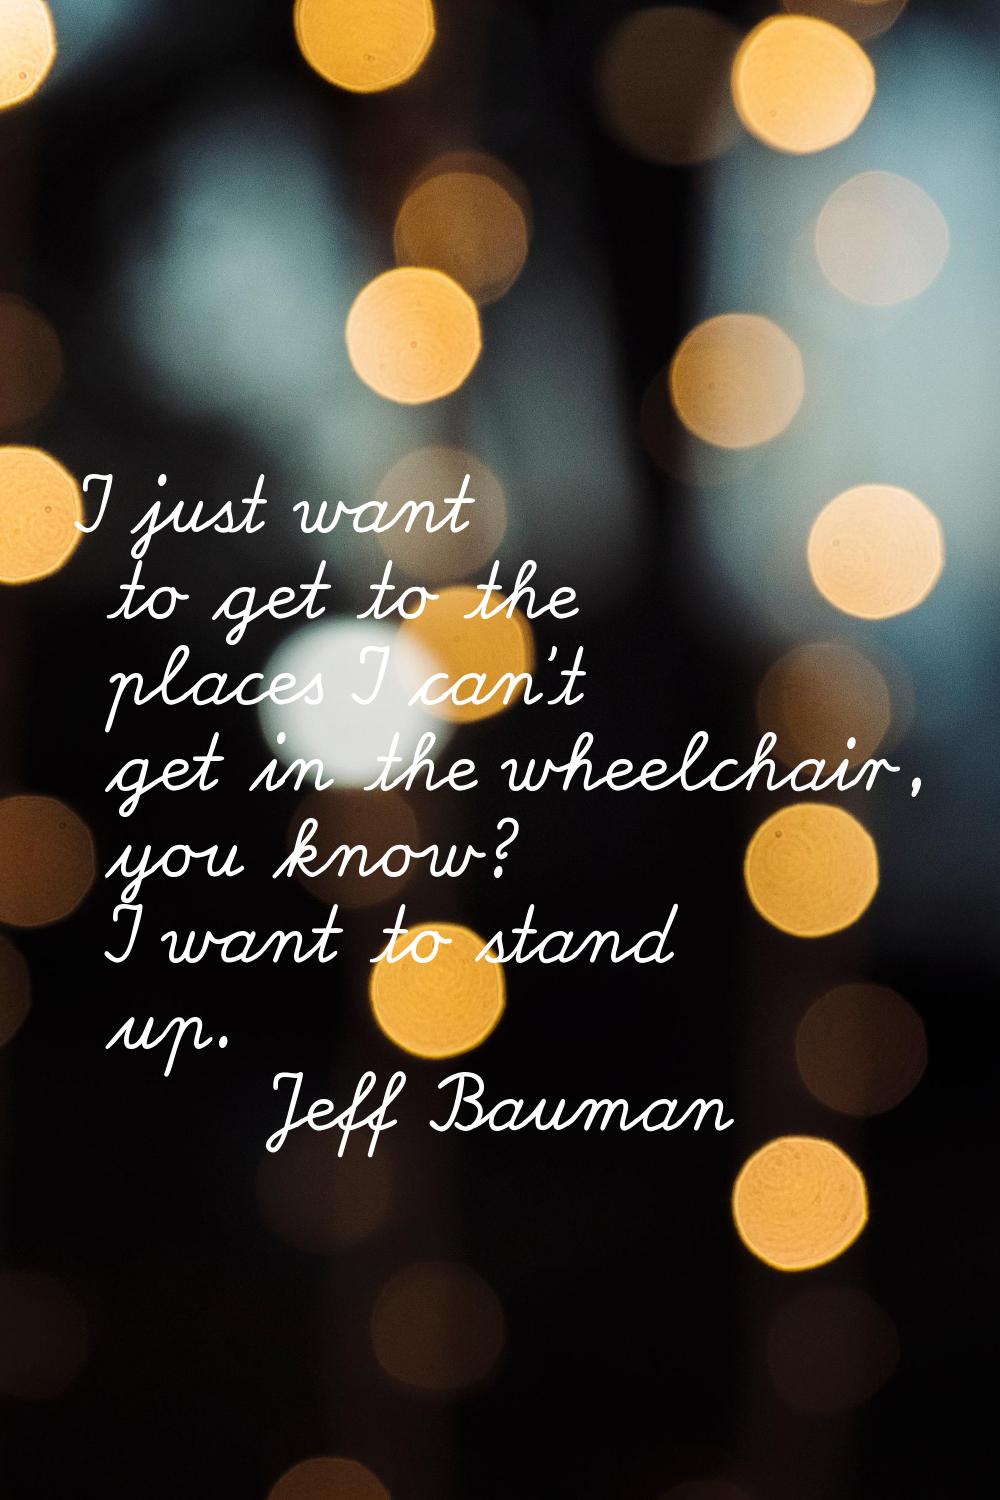 I just want to get to the places I can't get in the wheelchair, you know? I want to stand up.